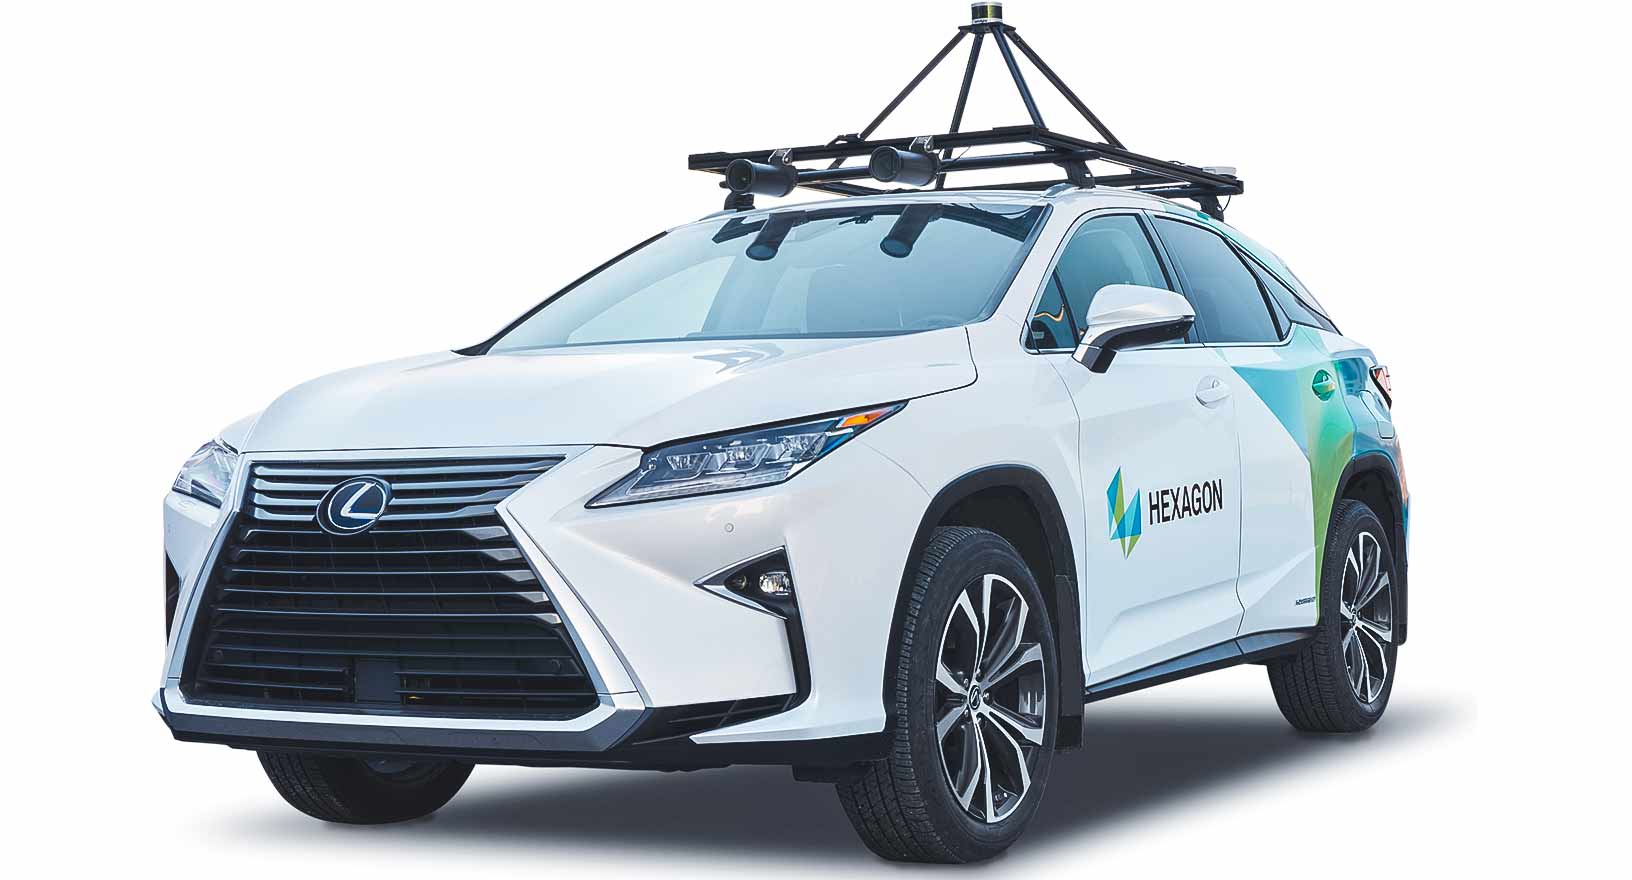 Self-driving test car with sensors mounted on roof 